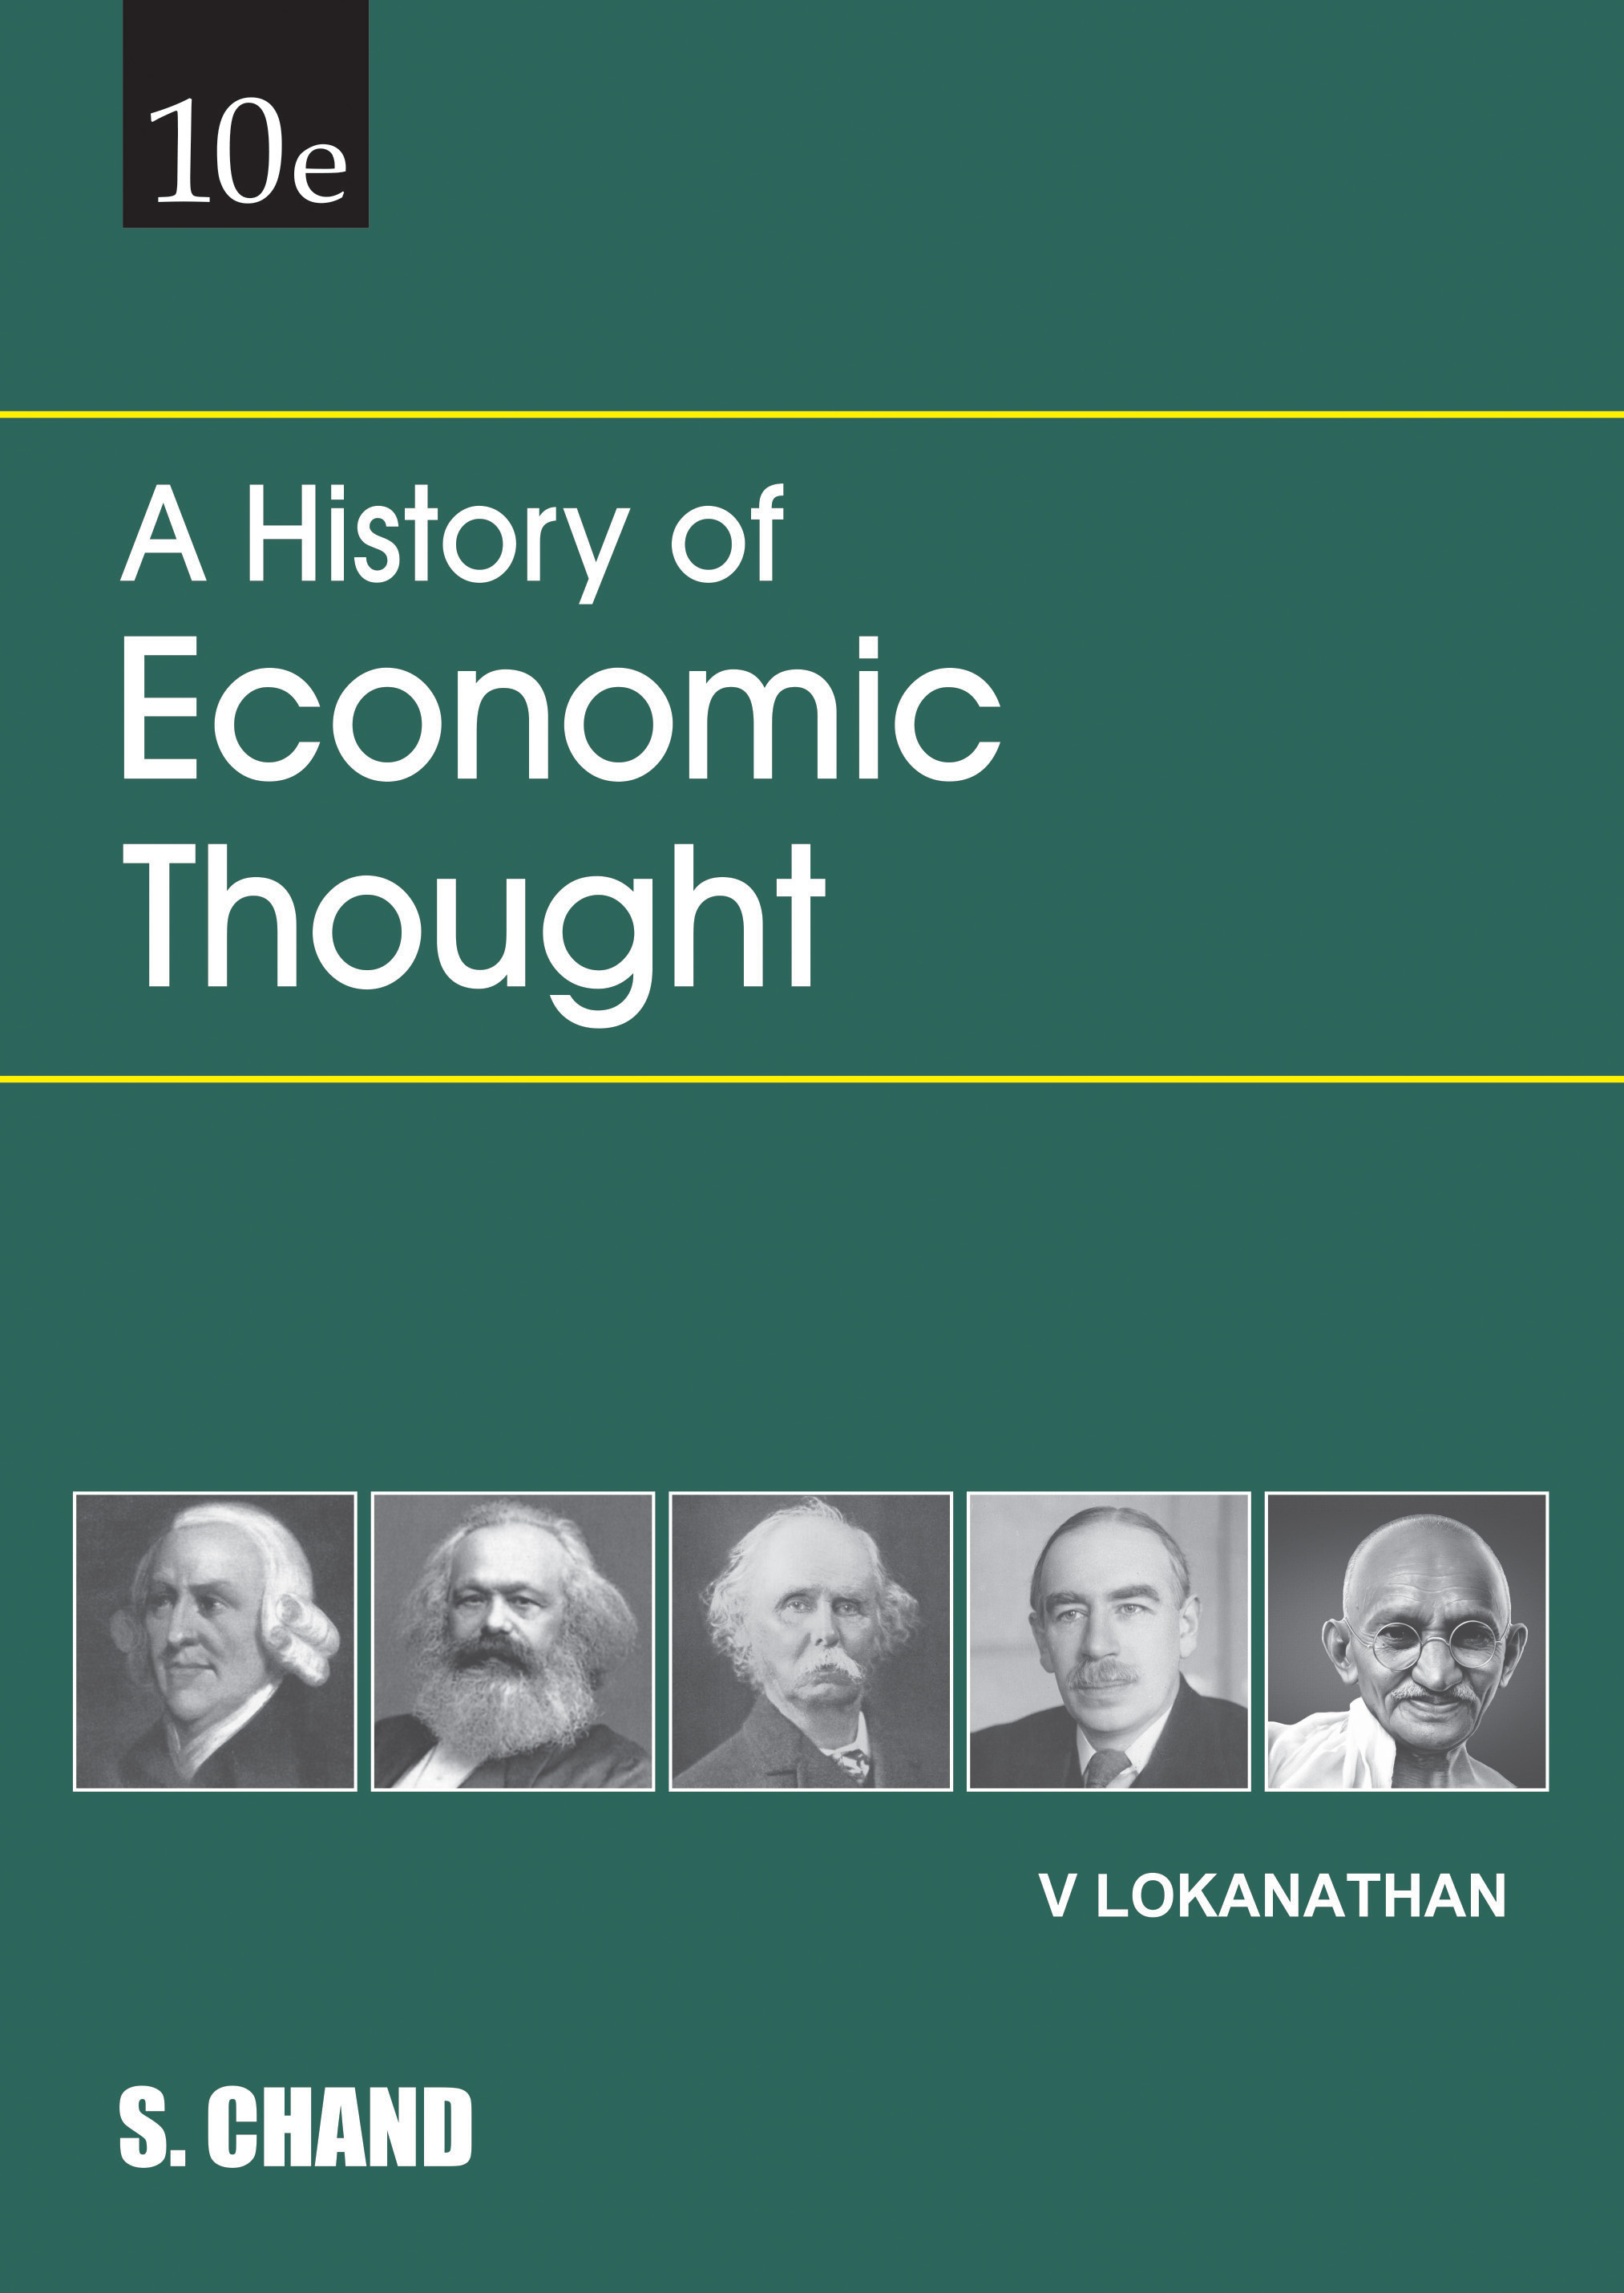 history of economic thought essay